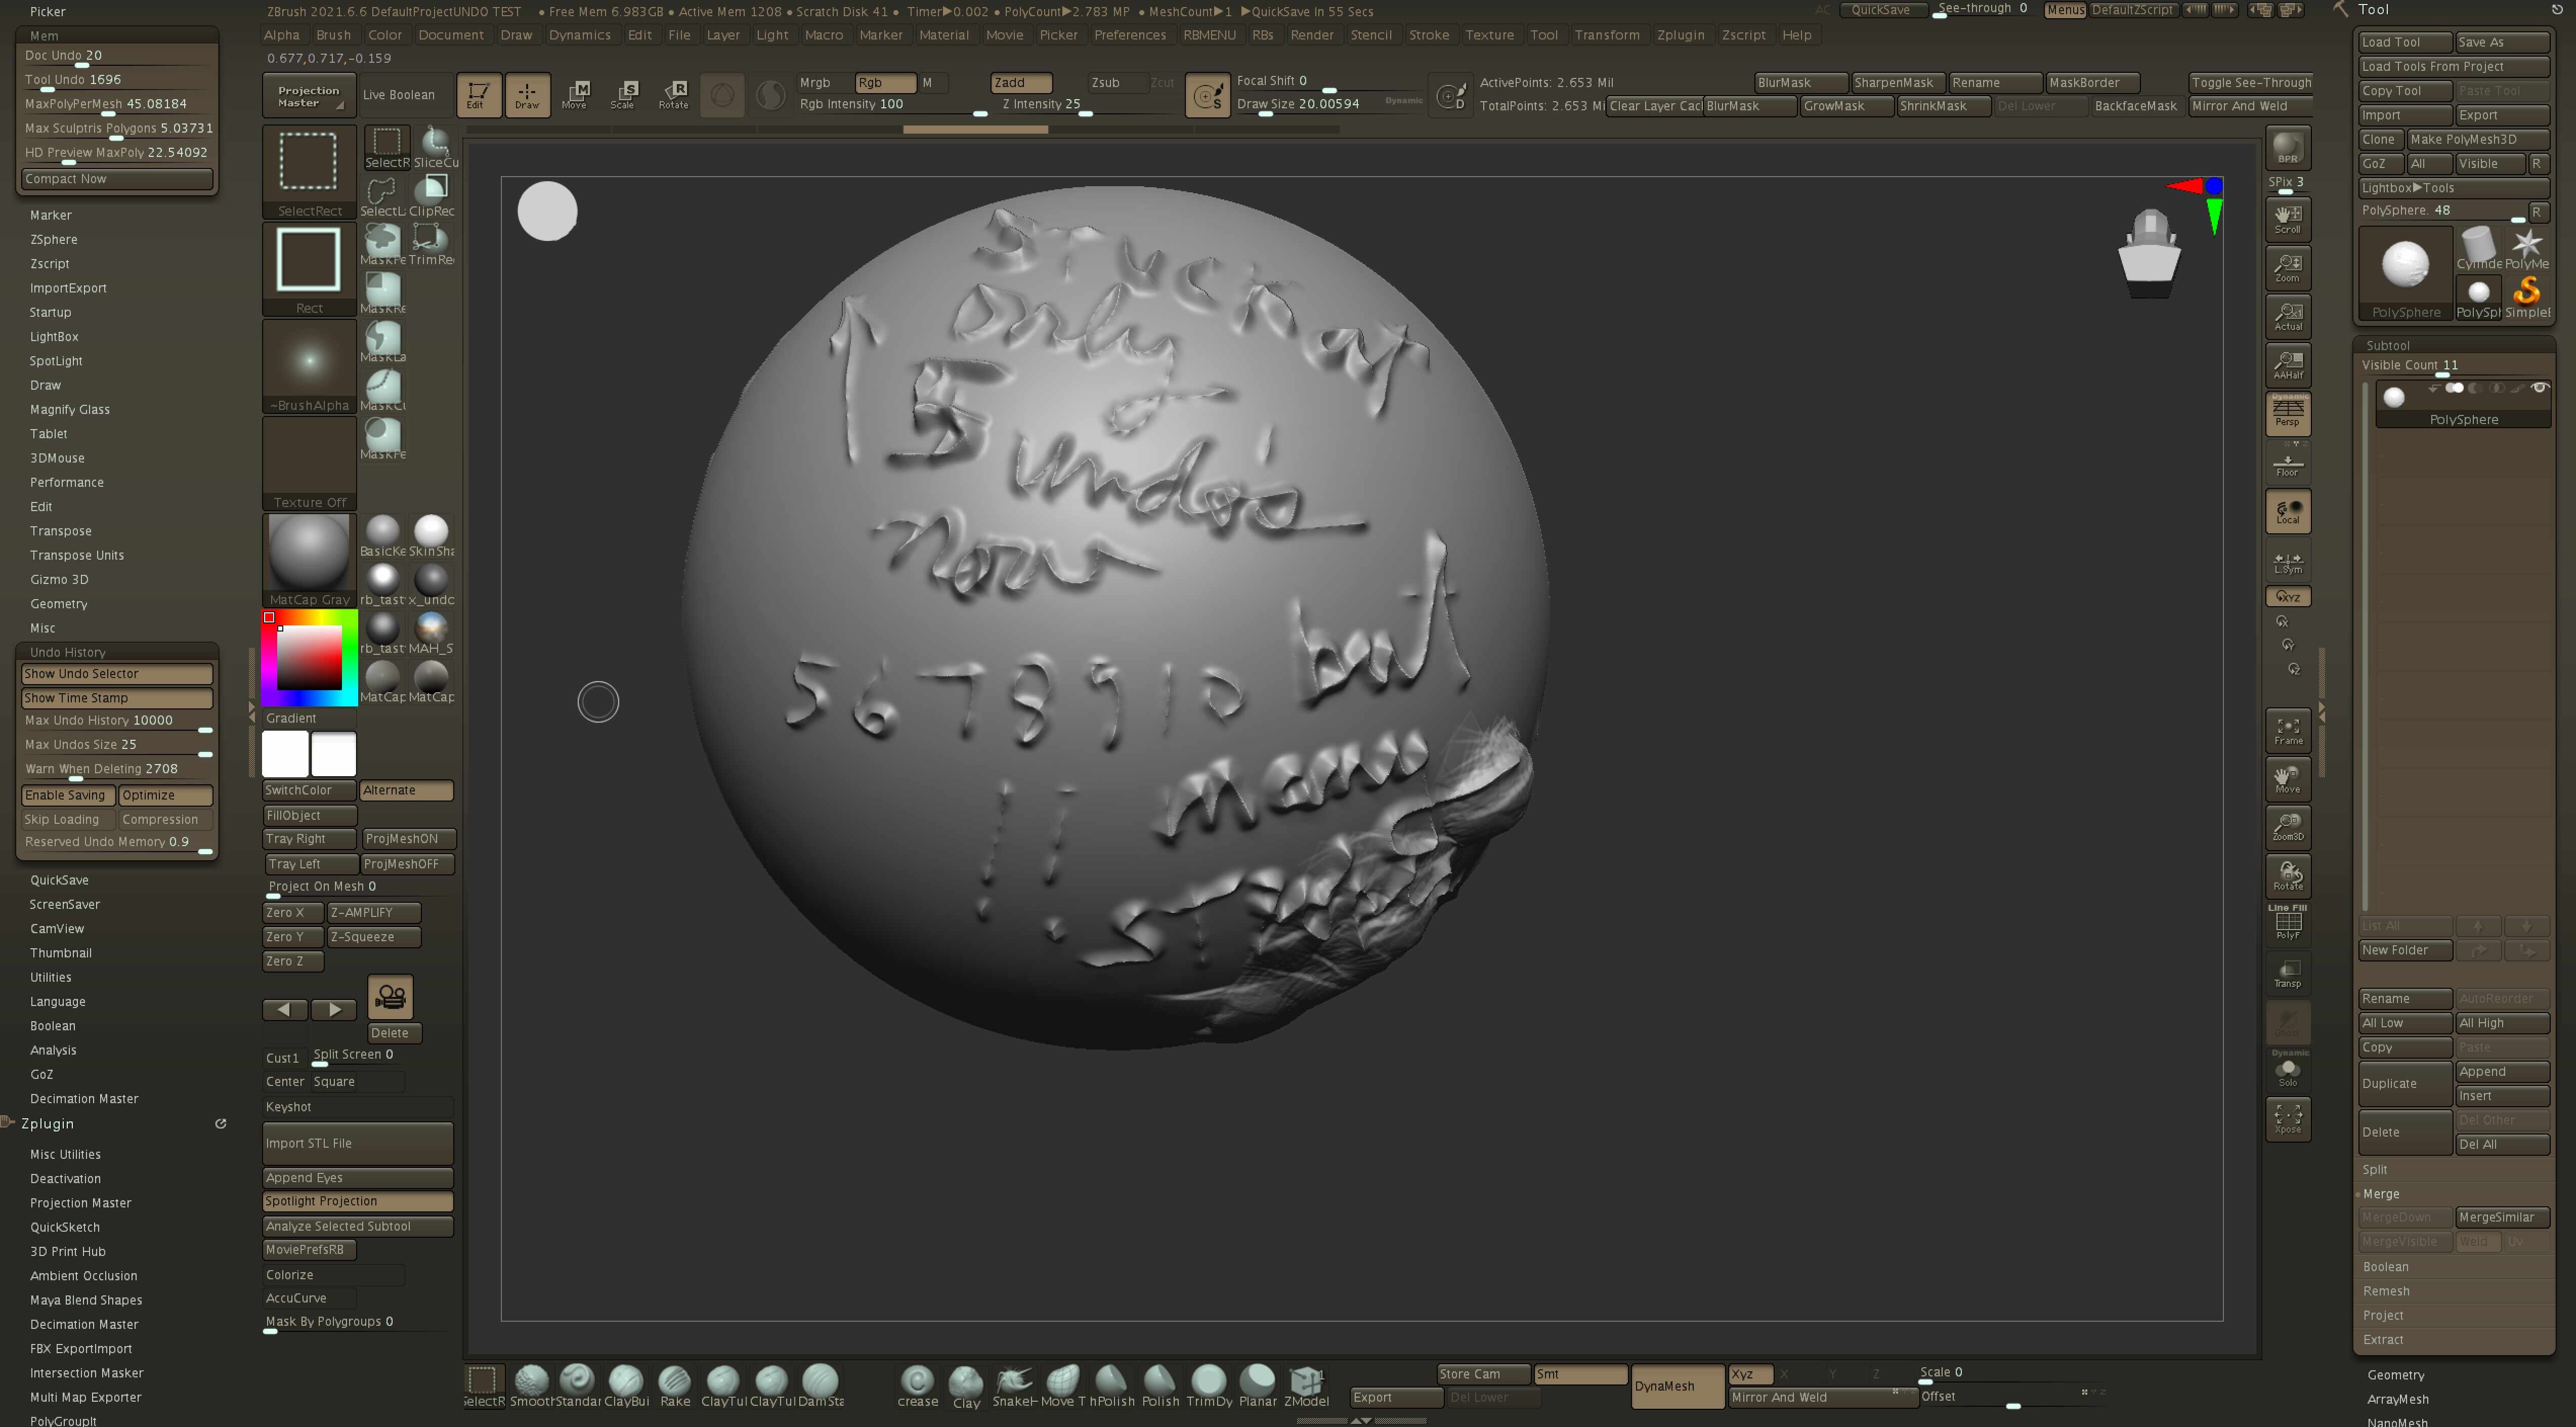 zbrush some undo history entries will be auto-deleted